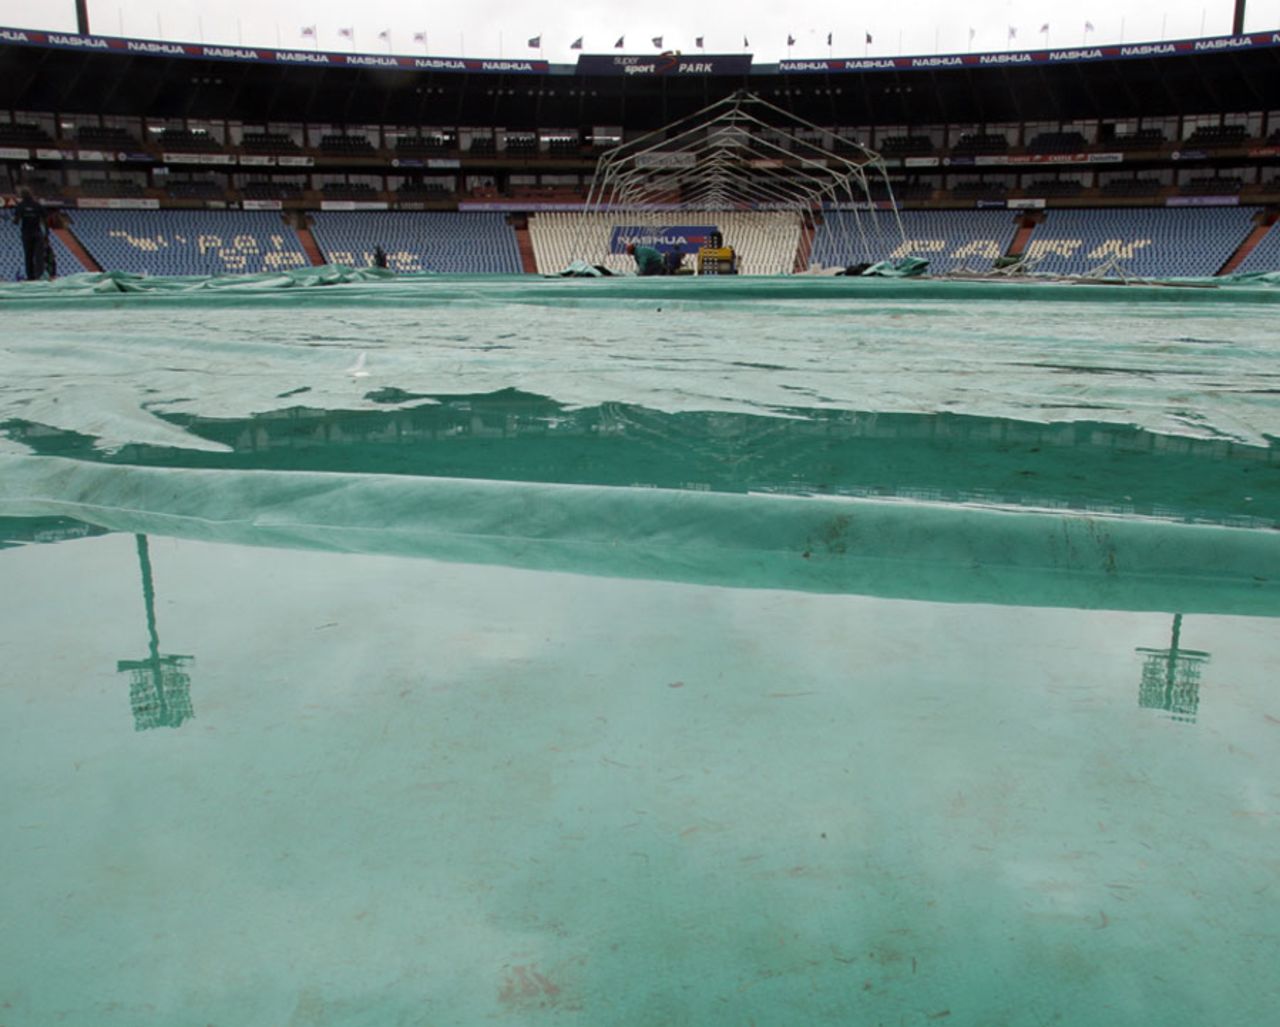 The covers were over the whole of SuperSport Park ahead of the first Test between India and South Africa, Centurion, December 15, 2010